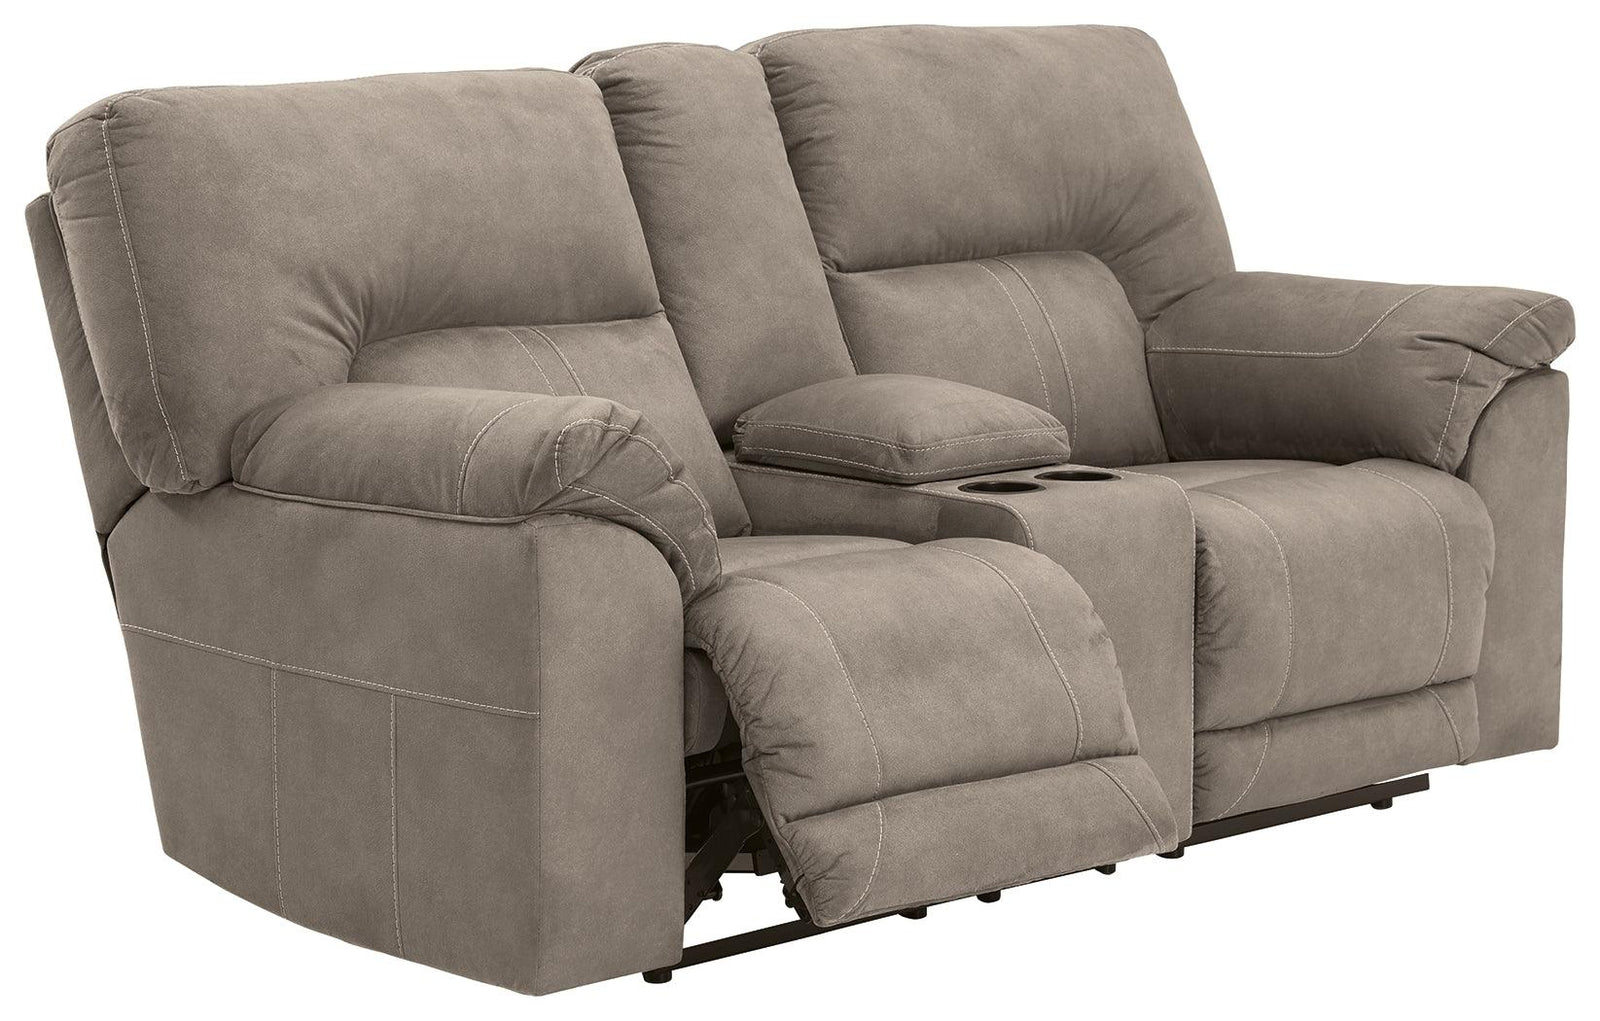 Cavalcade Slate Faux Leather Reclining Loveseat With Console